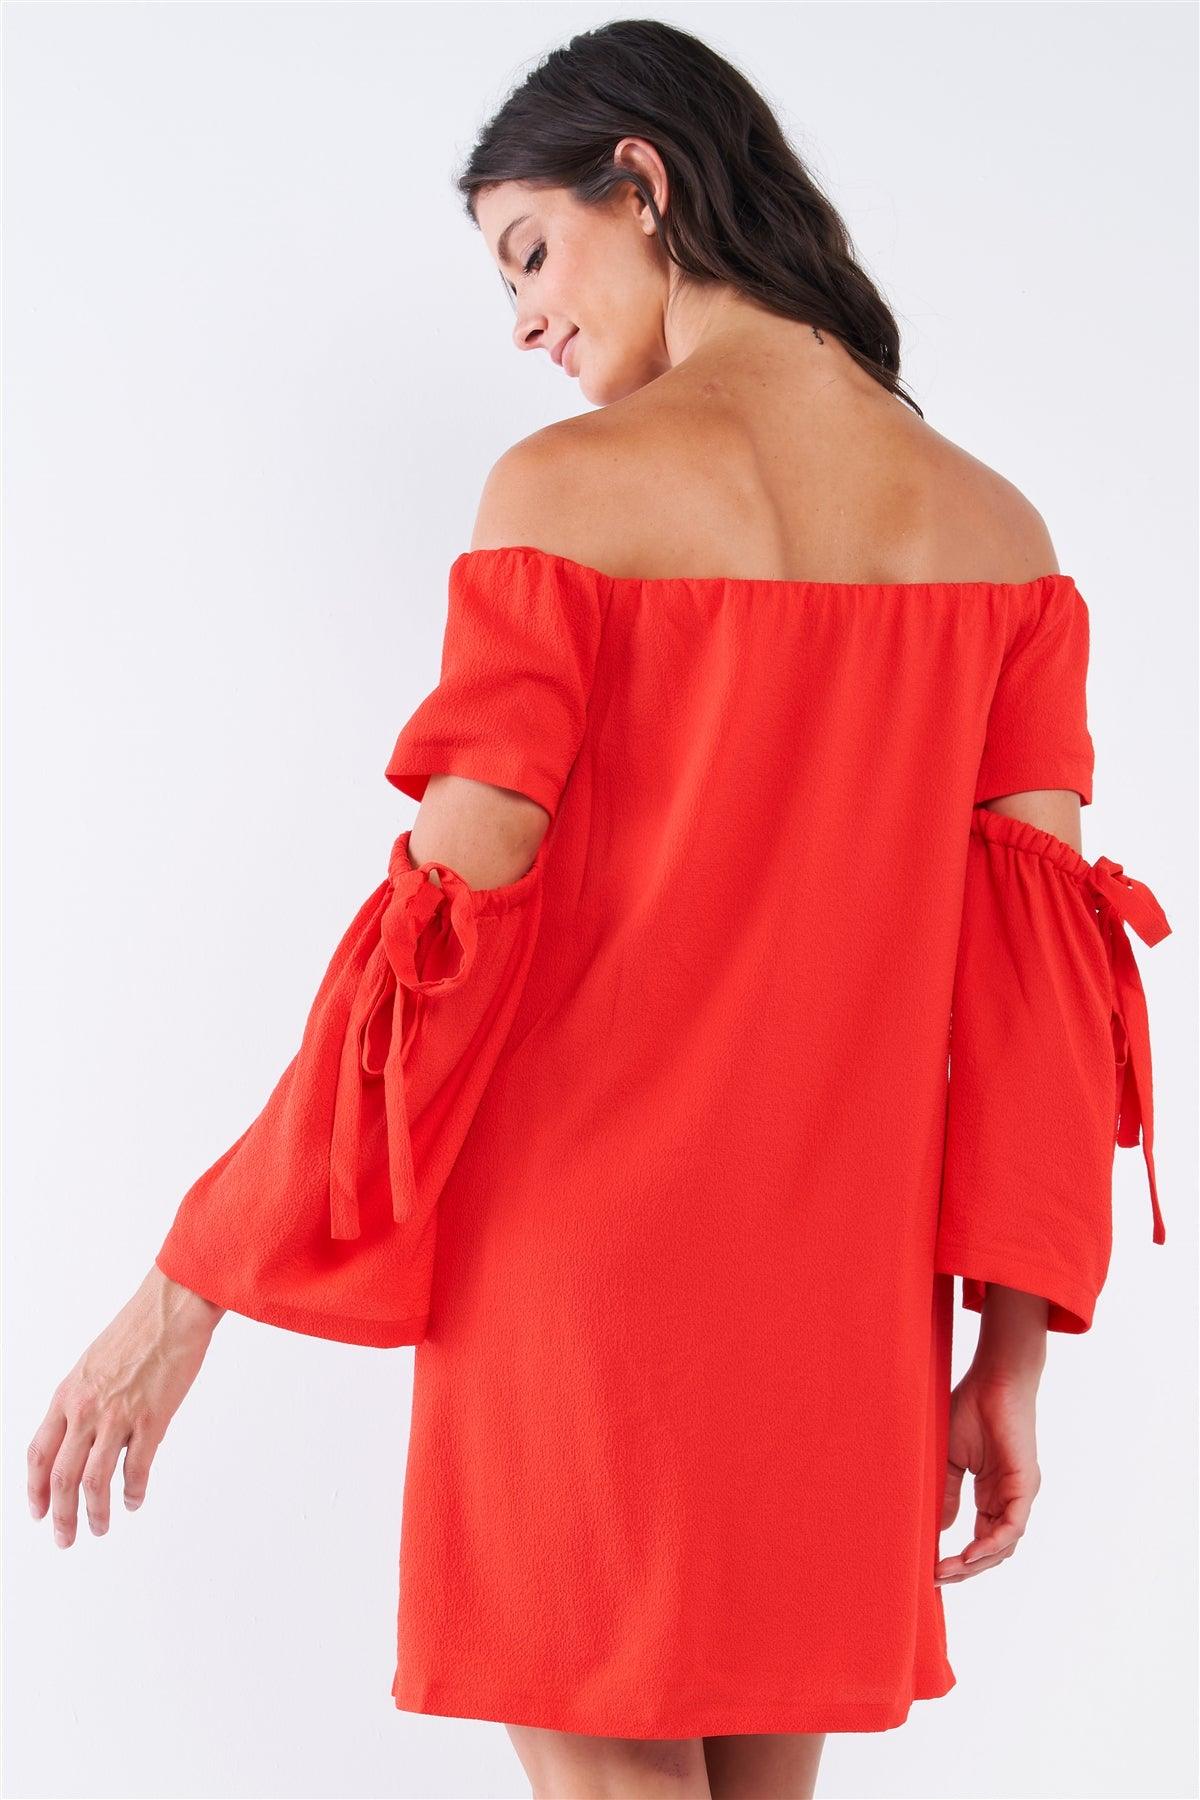 Coral Red Off-The-Shoulder Relaxed Fit Cut Out Bell Sleeve With Elastic Ribbon Tie Mini Dress